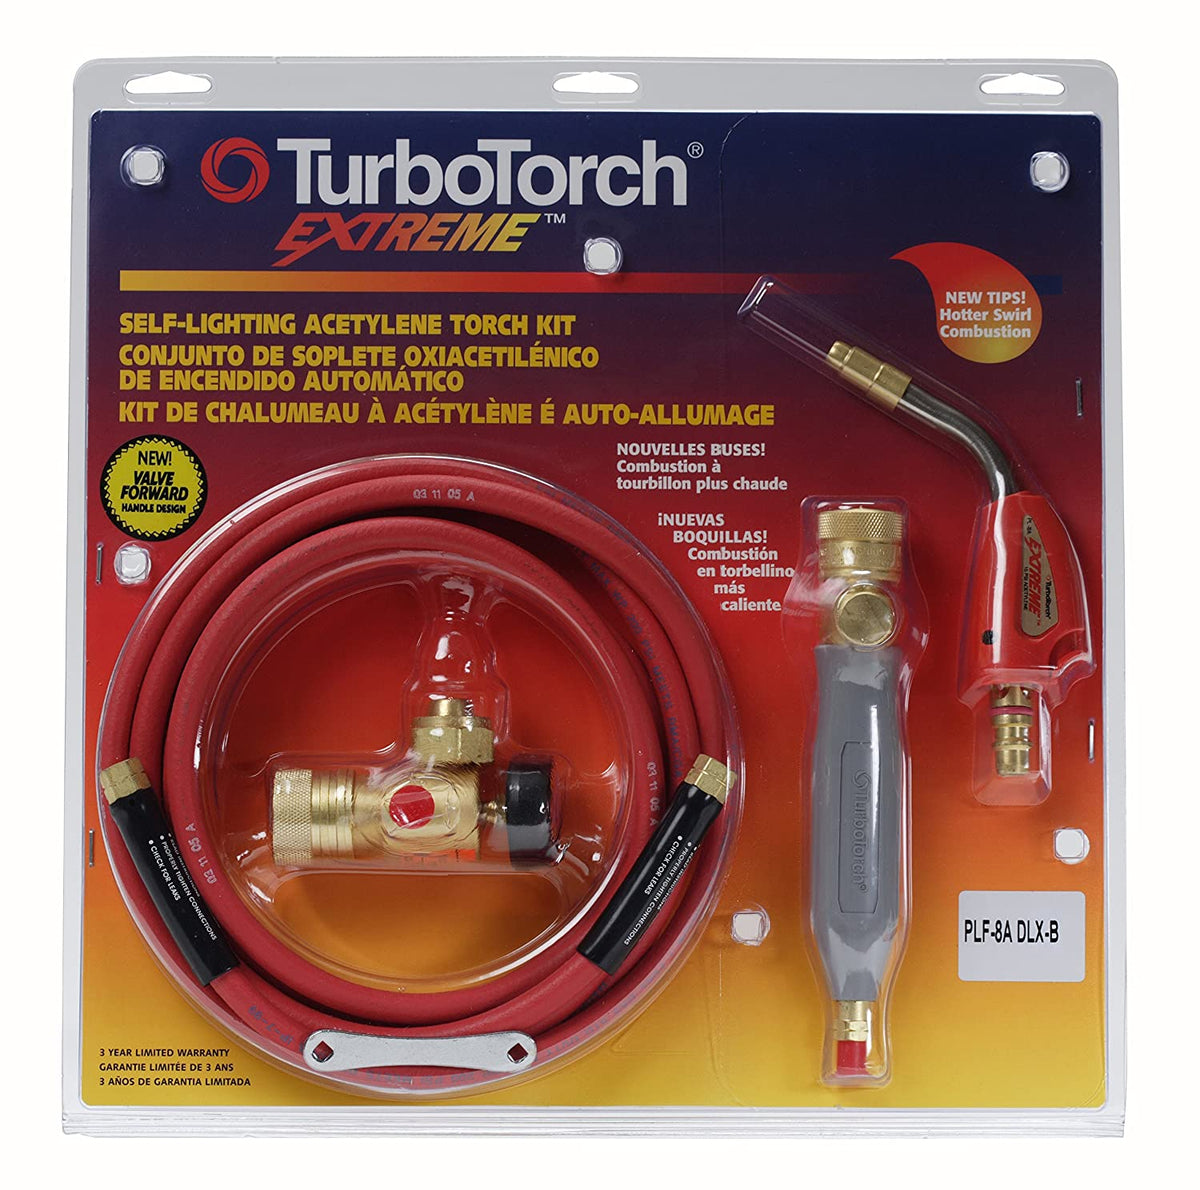 TurboTorch Extreme Self Lighting Air Acetylene Kits for B Tanks